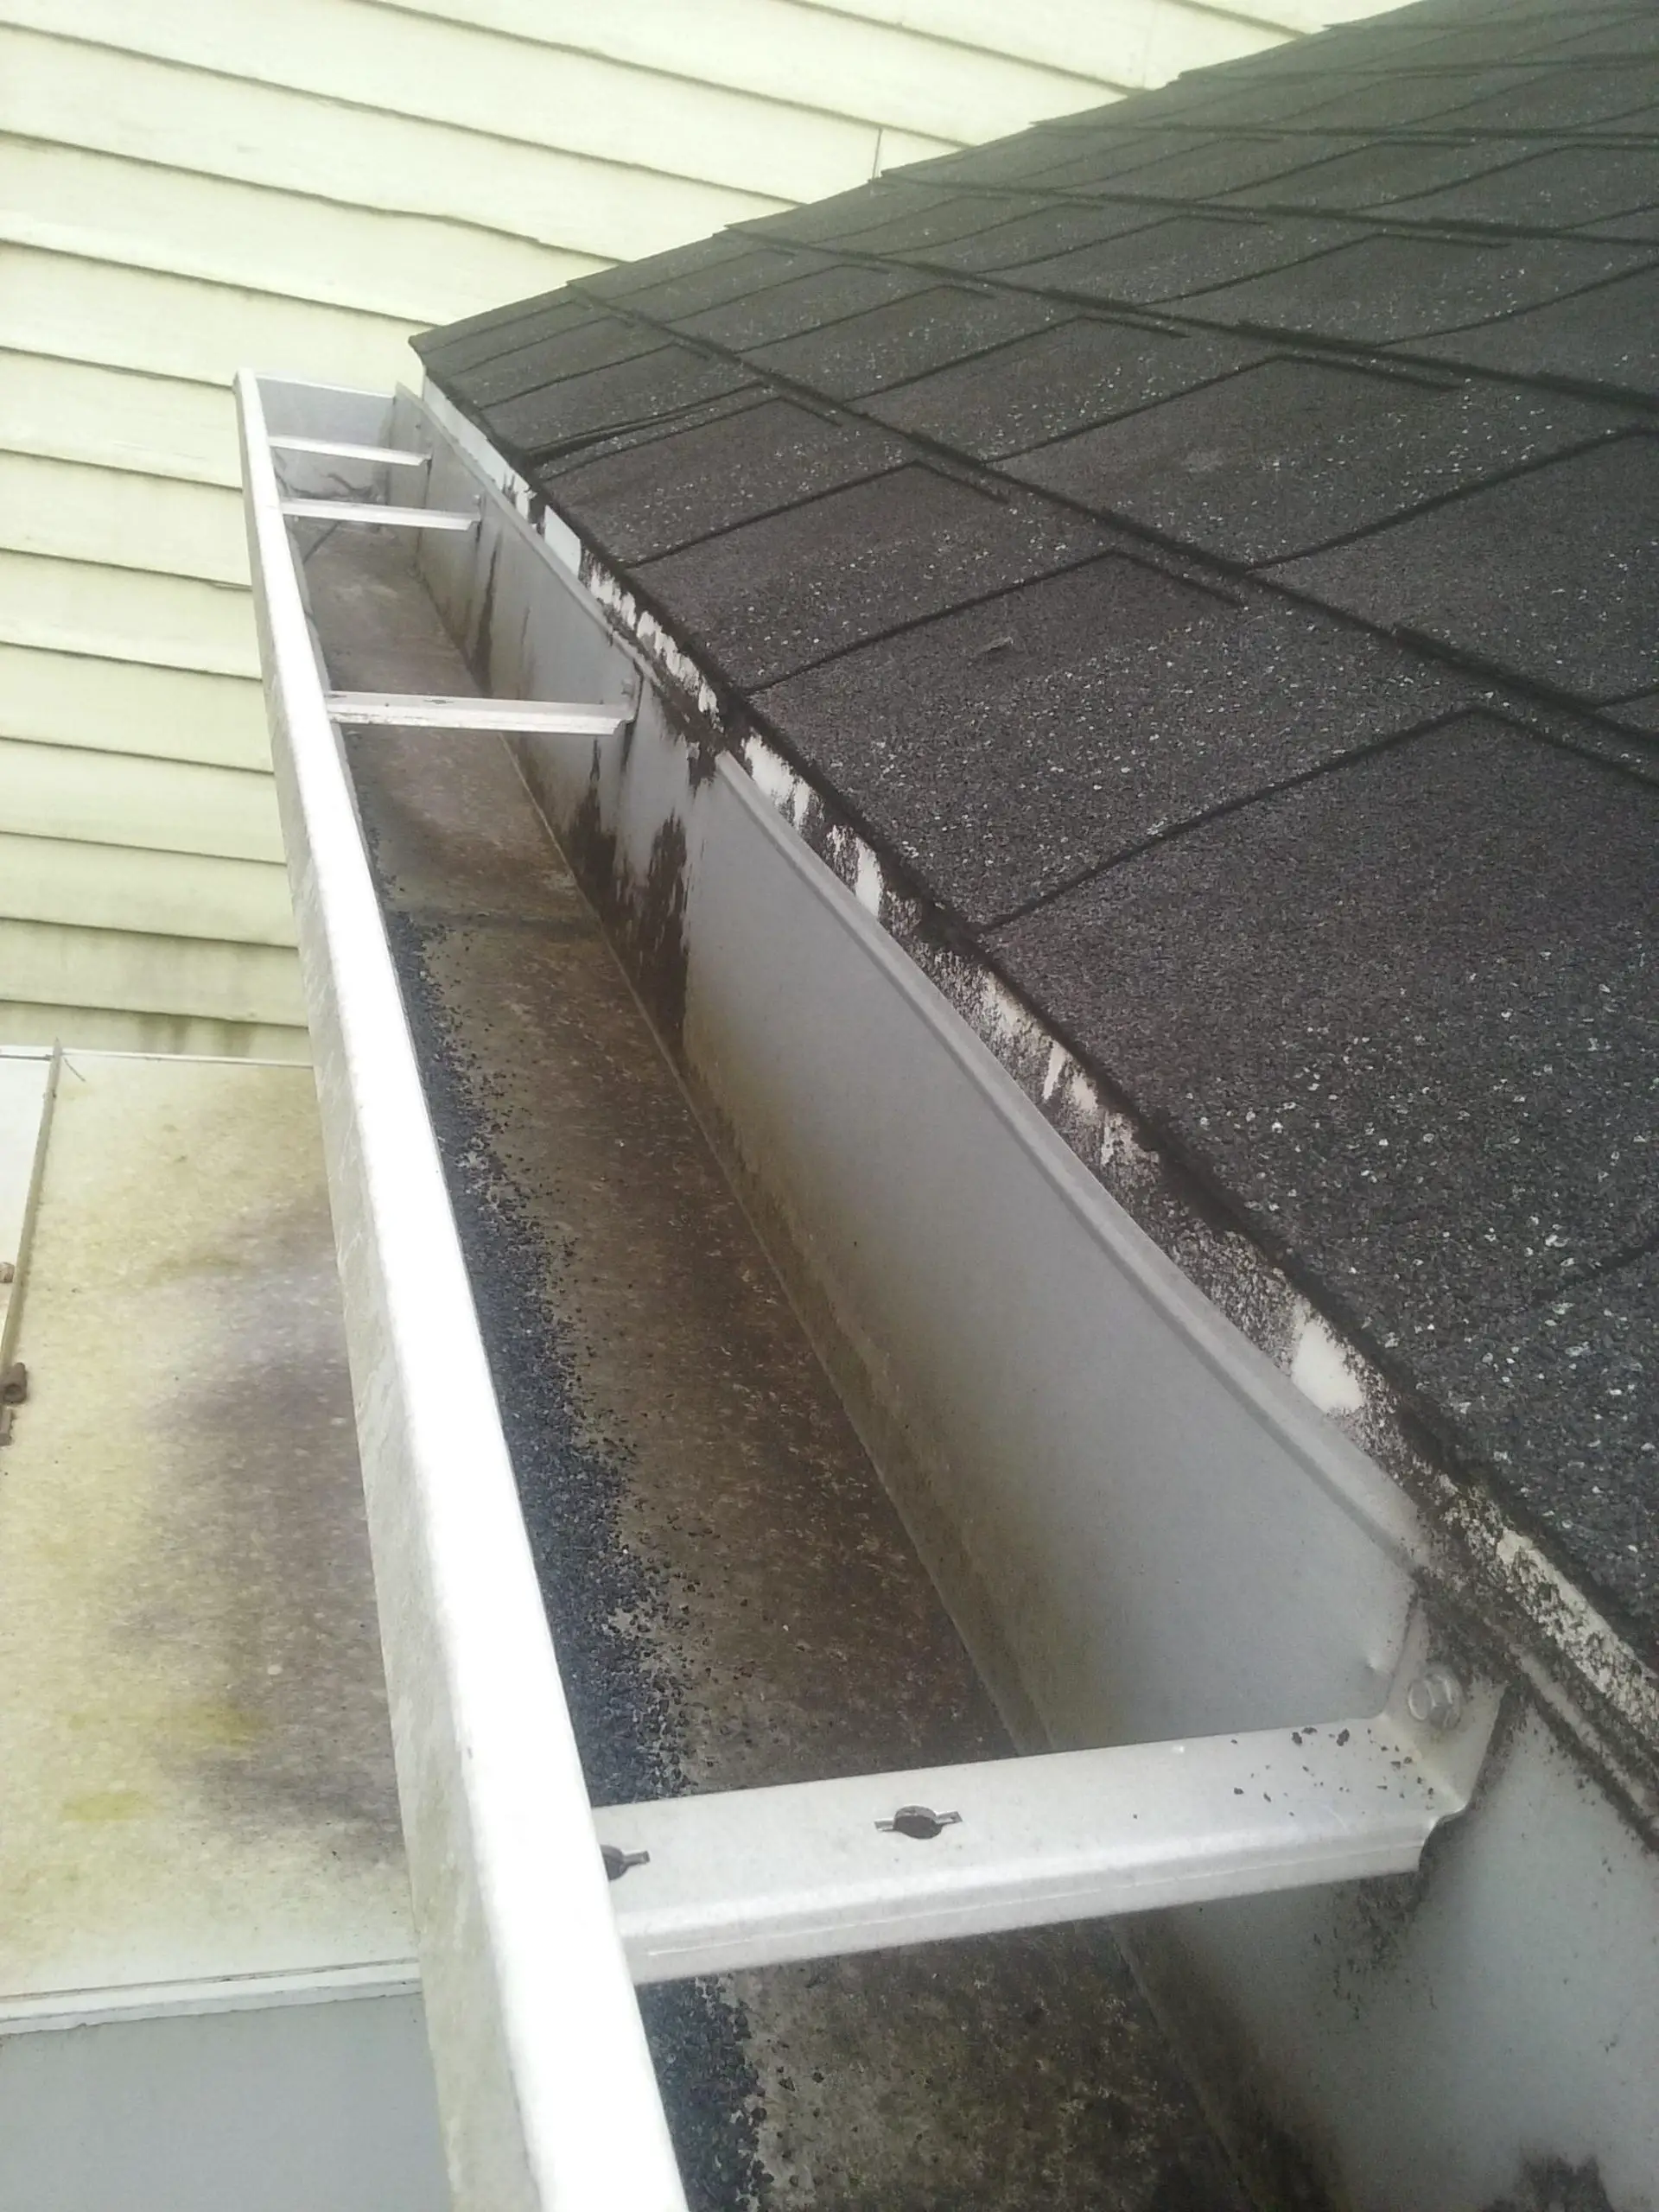 Should My Roof Have Drip Edge, and What Color Should It Be?